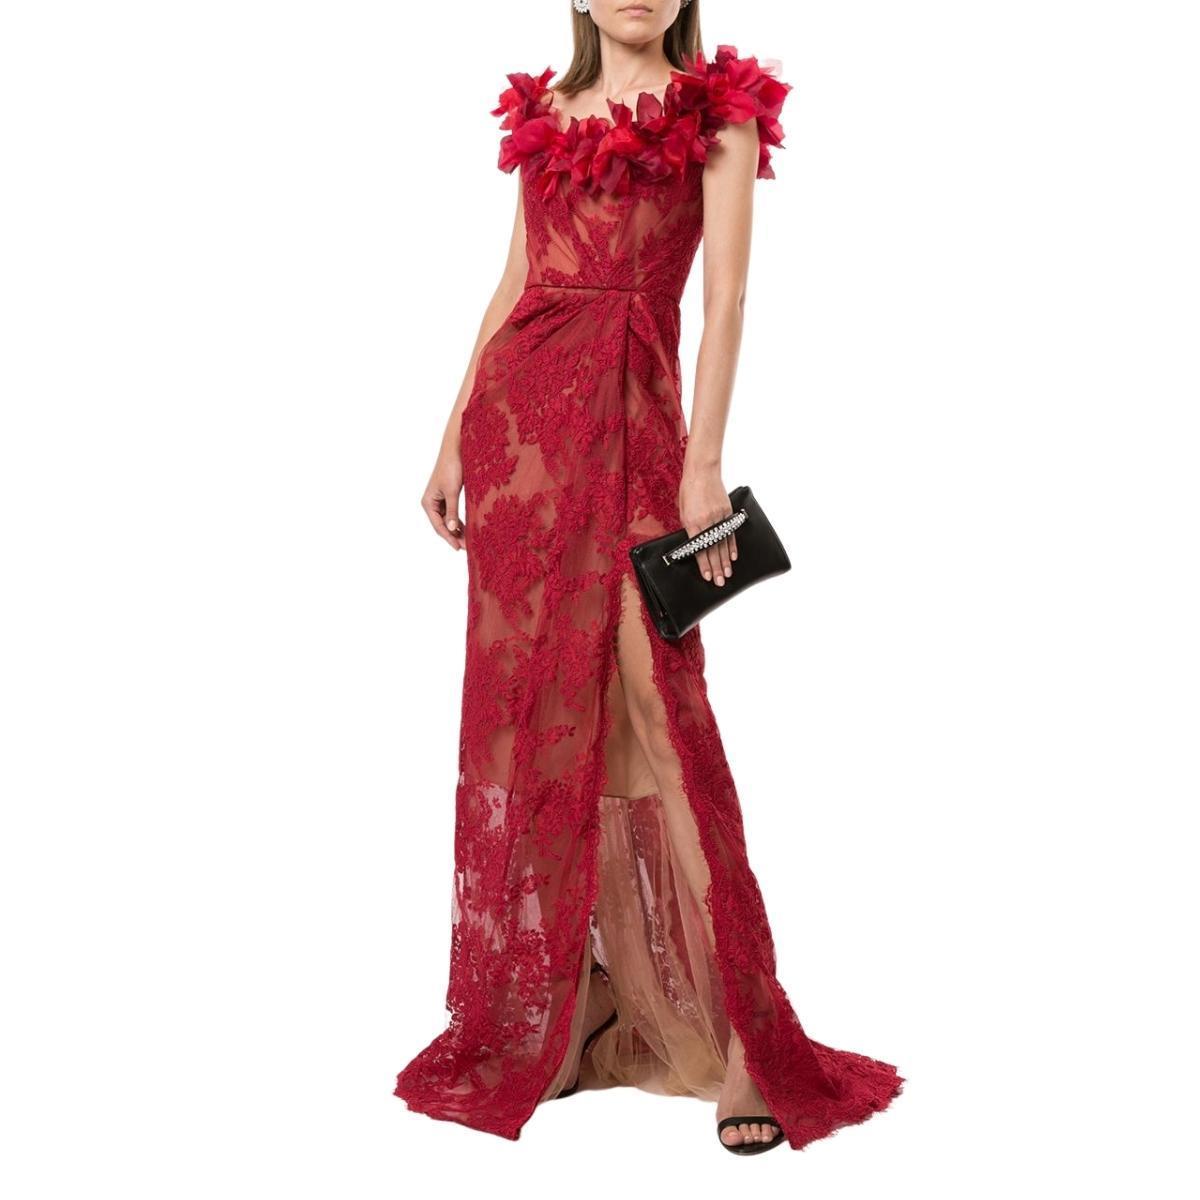 This exquisite gown is topped with a diaphanous floral appliqué across an off-the-shoulder neckline, mirroring the florals in its lace overlay. It has a subtle drape at the hip and a cut-up-to-there side slit edged with delicate scallop